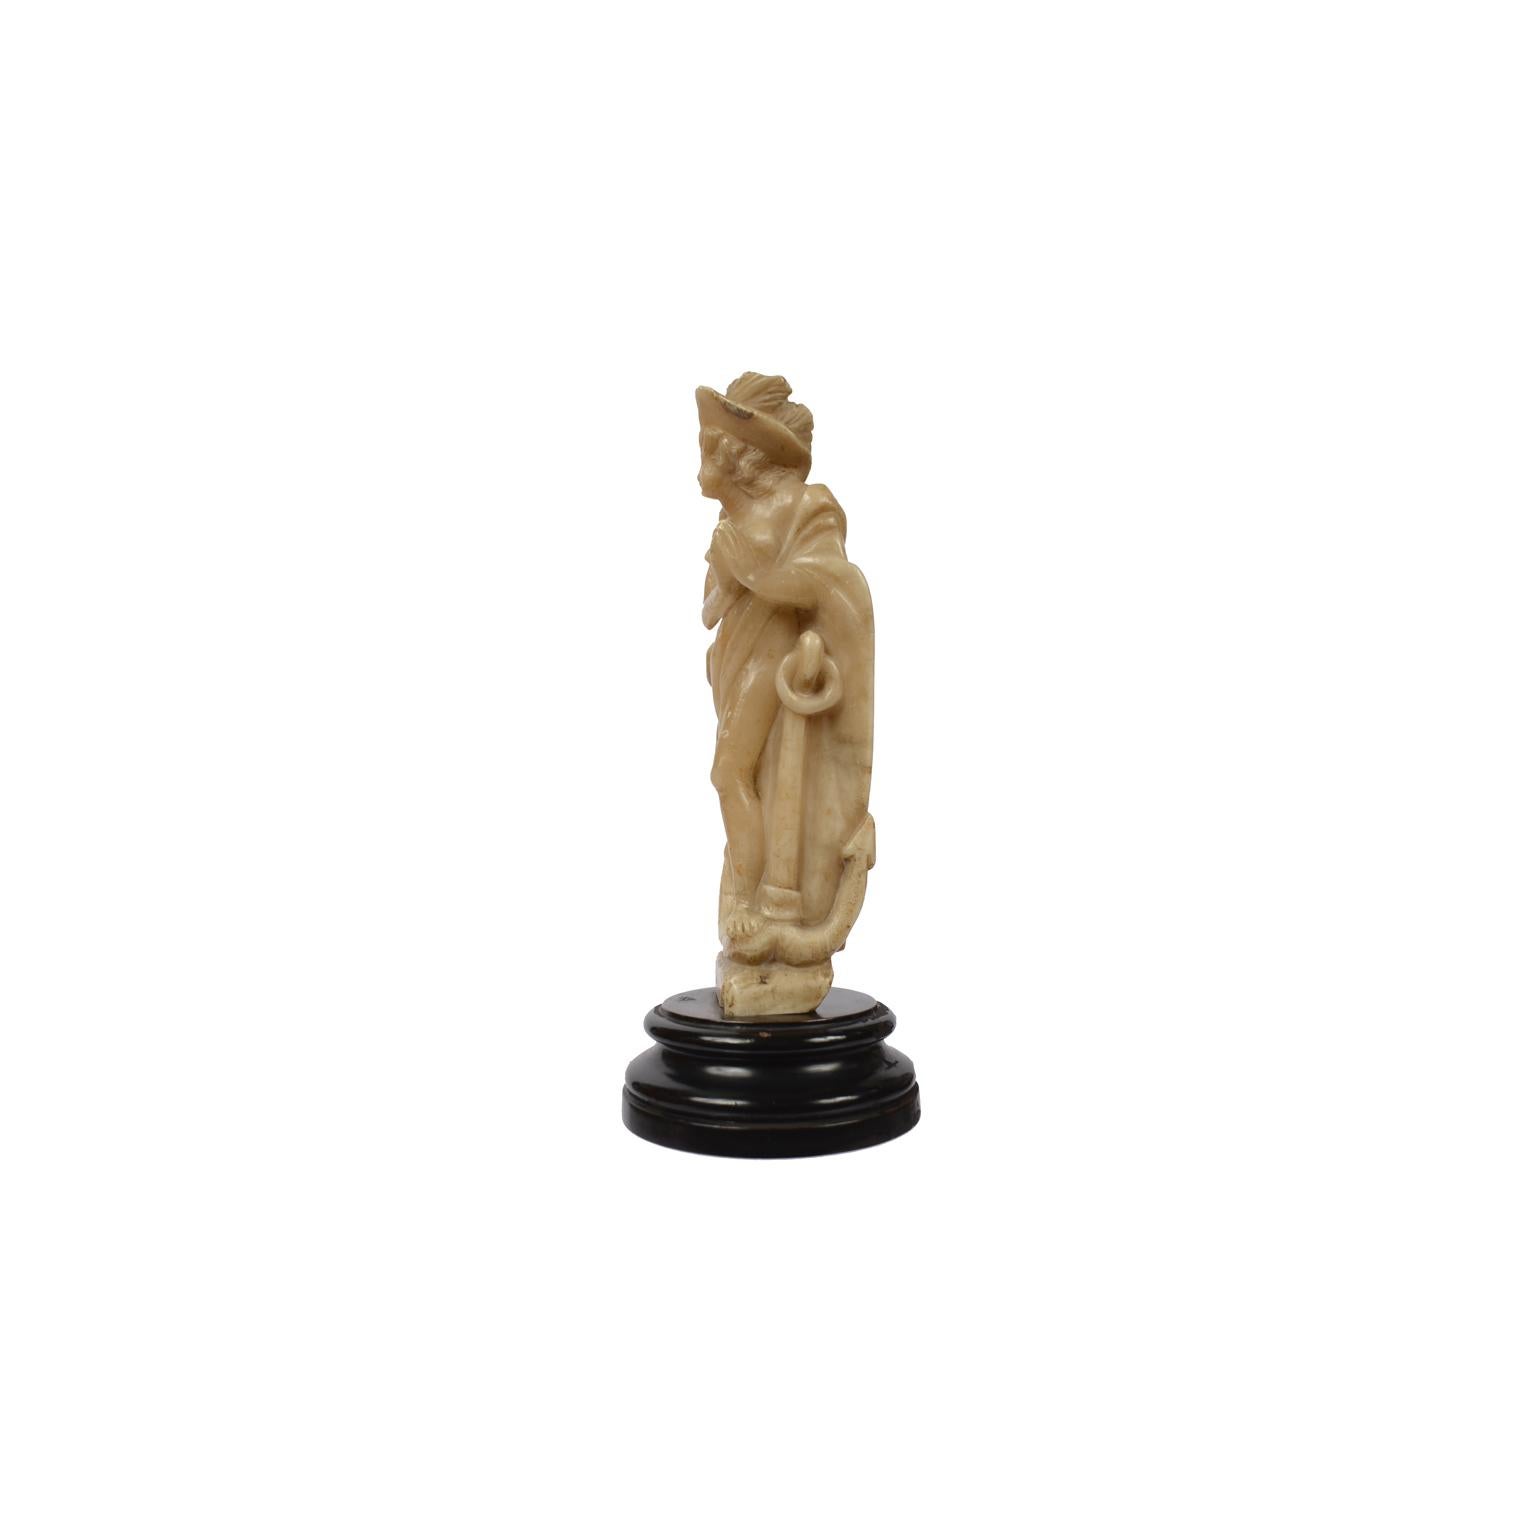 Mid-18th Century French Alabaster Sculpture Depicting a Female Nude with Anchor  For Sale 1